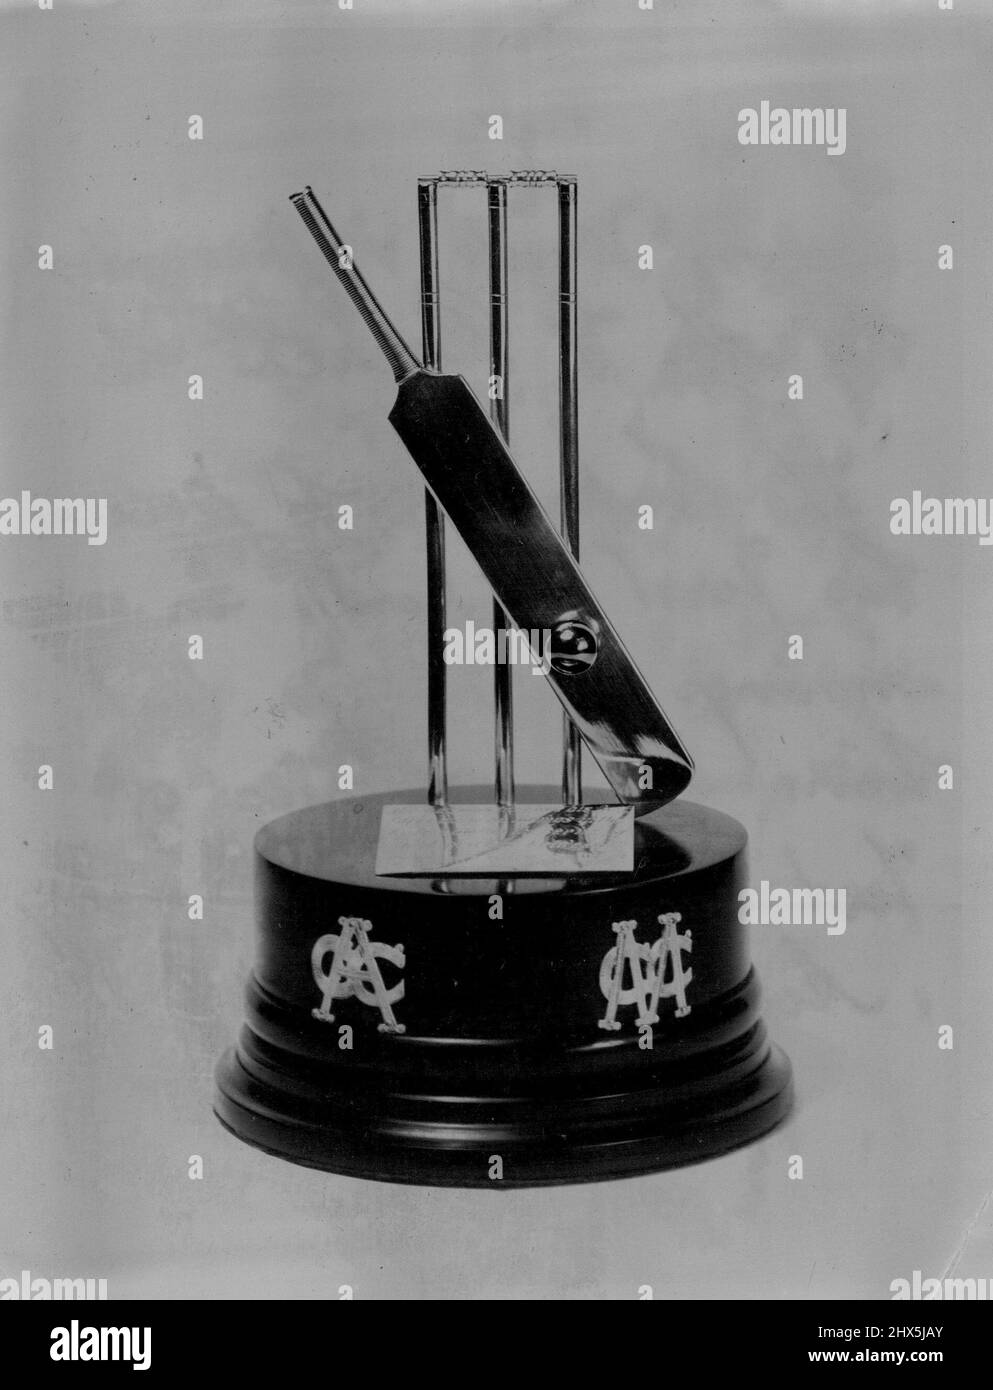 Trophy made & presented by Mr. G. Pearch to the batsman to secure his first 50 runs in an innings in The fastest time in The series of test cricket between Eng v Aust 1932-3. December 05, 1932. Stock Photo